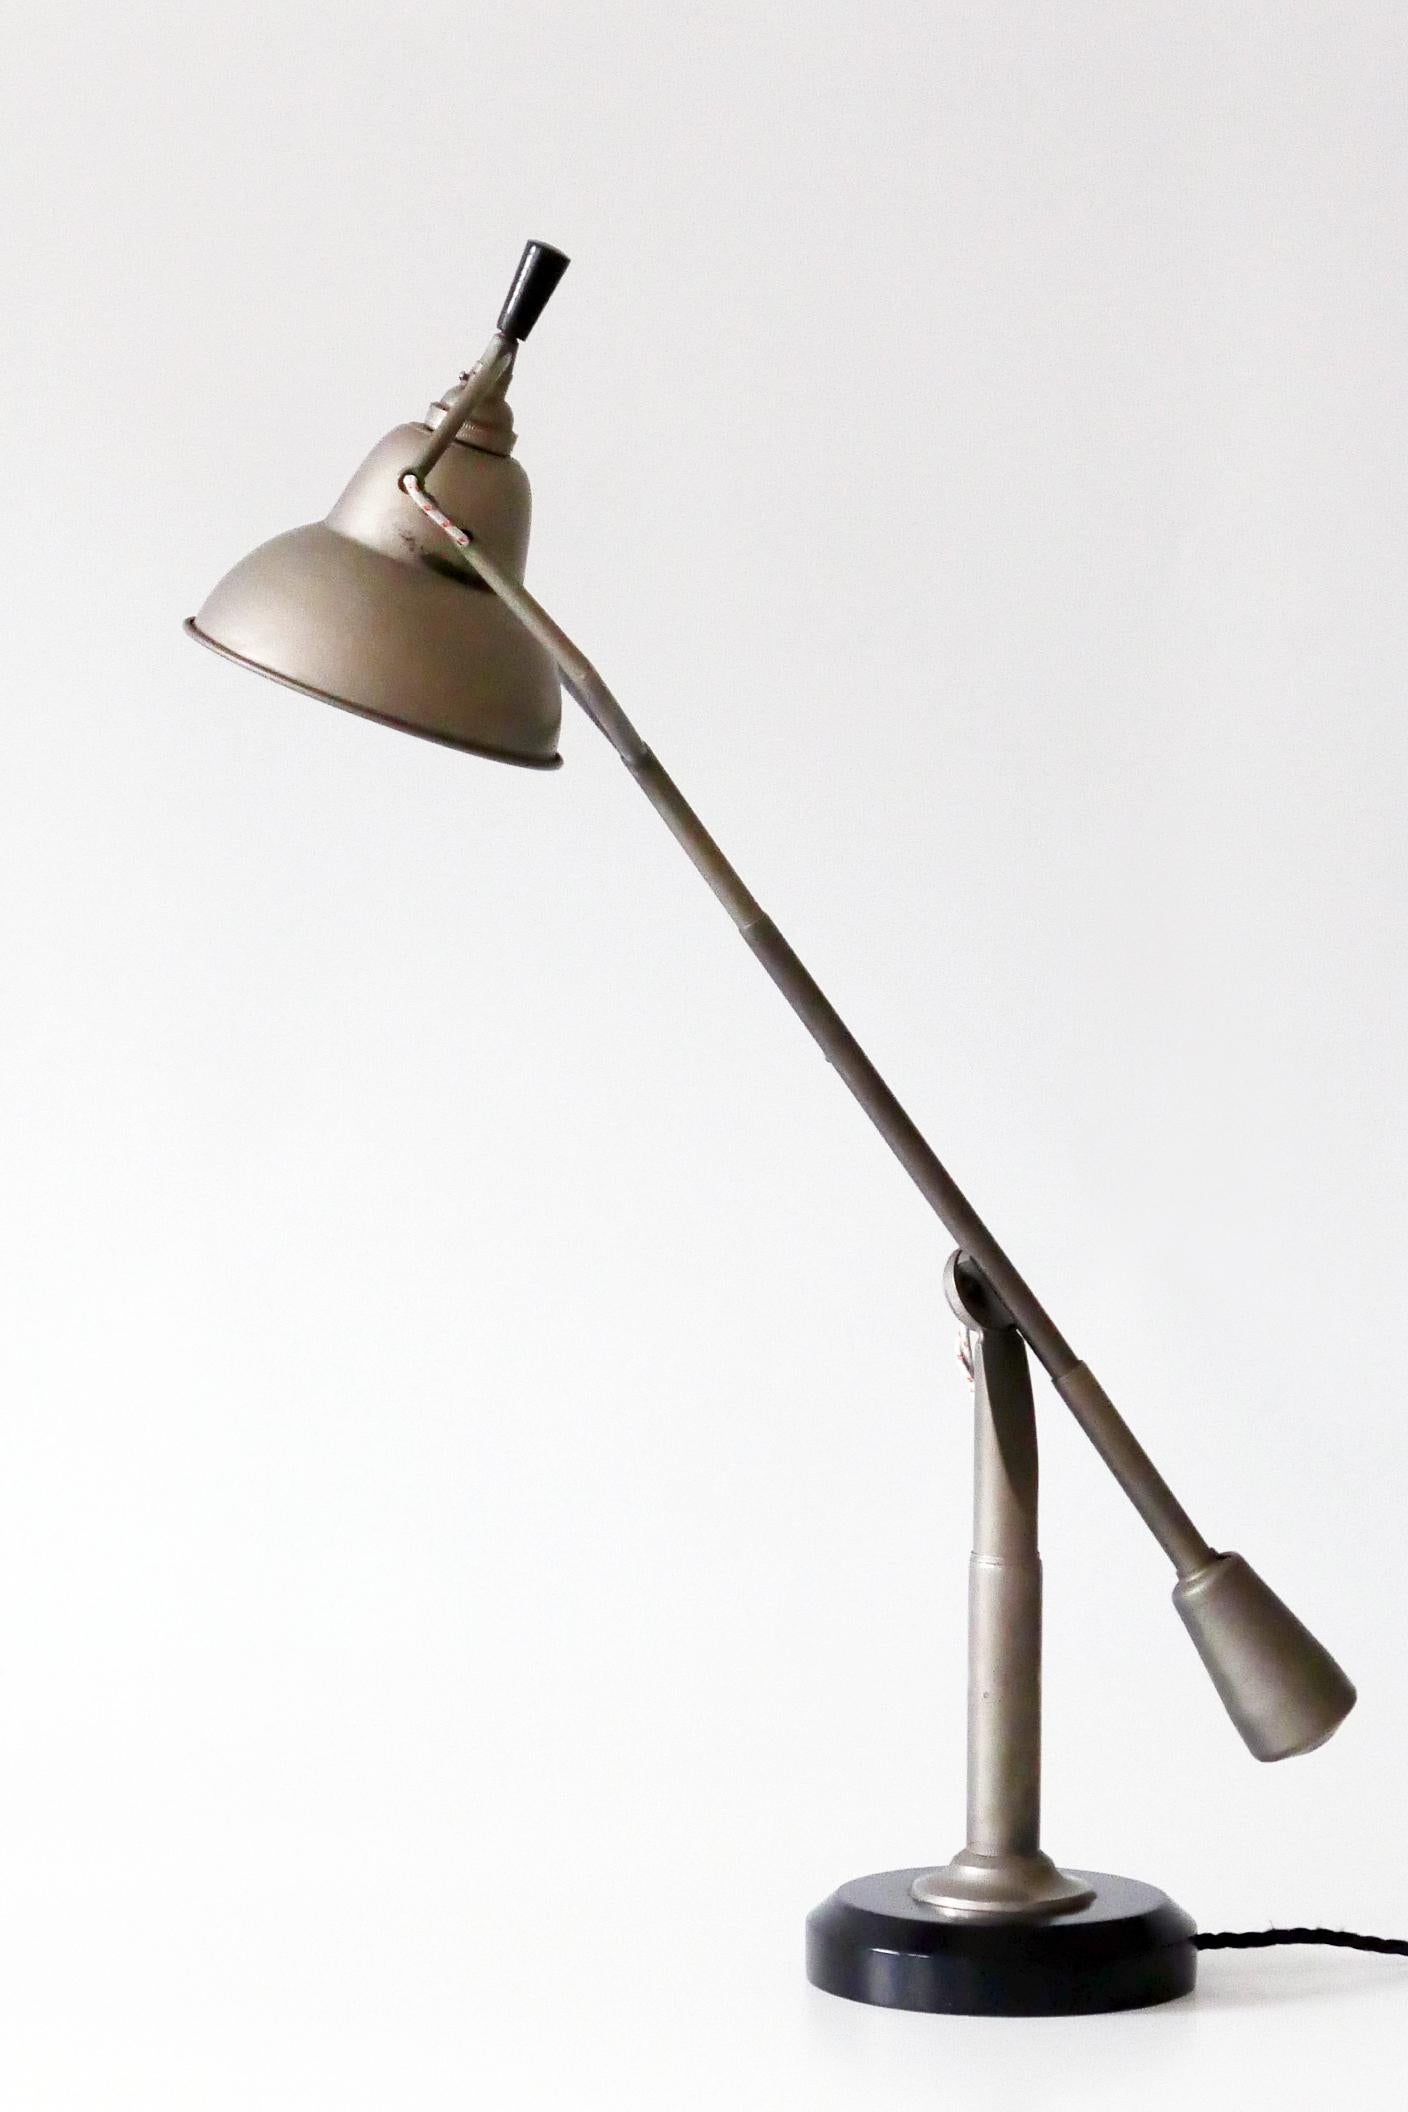 Plated Modernist Counterbalance Table Lamp by Edouard-Wilfred Buquet, 1927, France For Sale